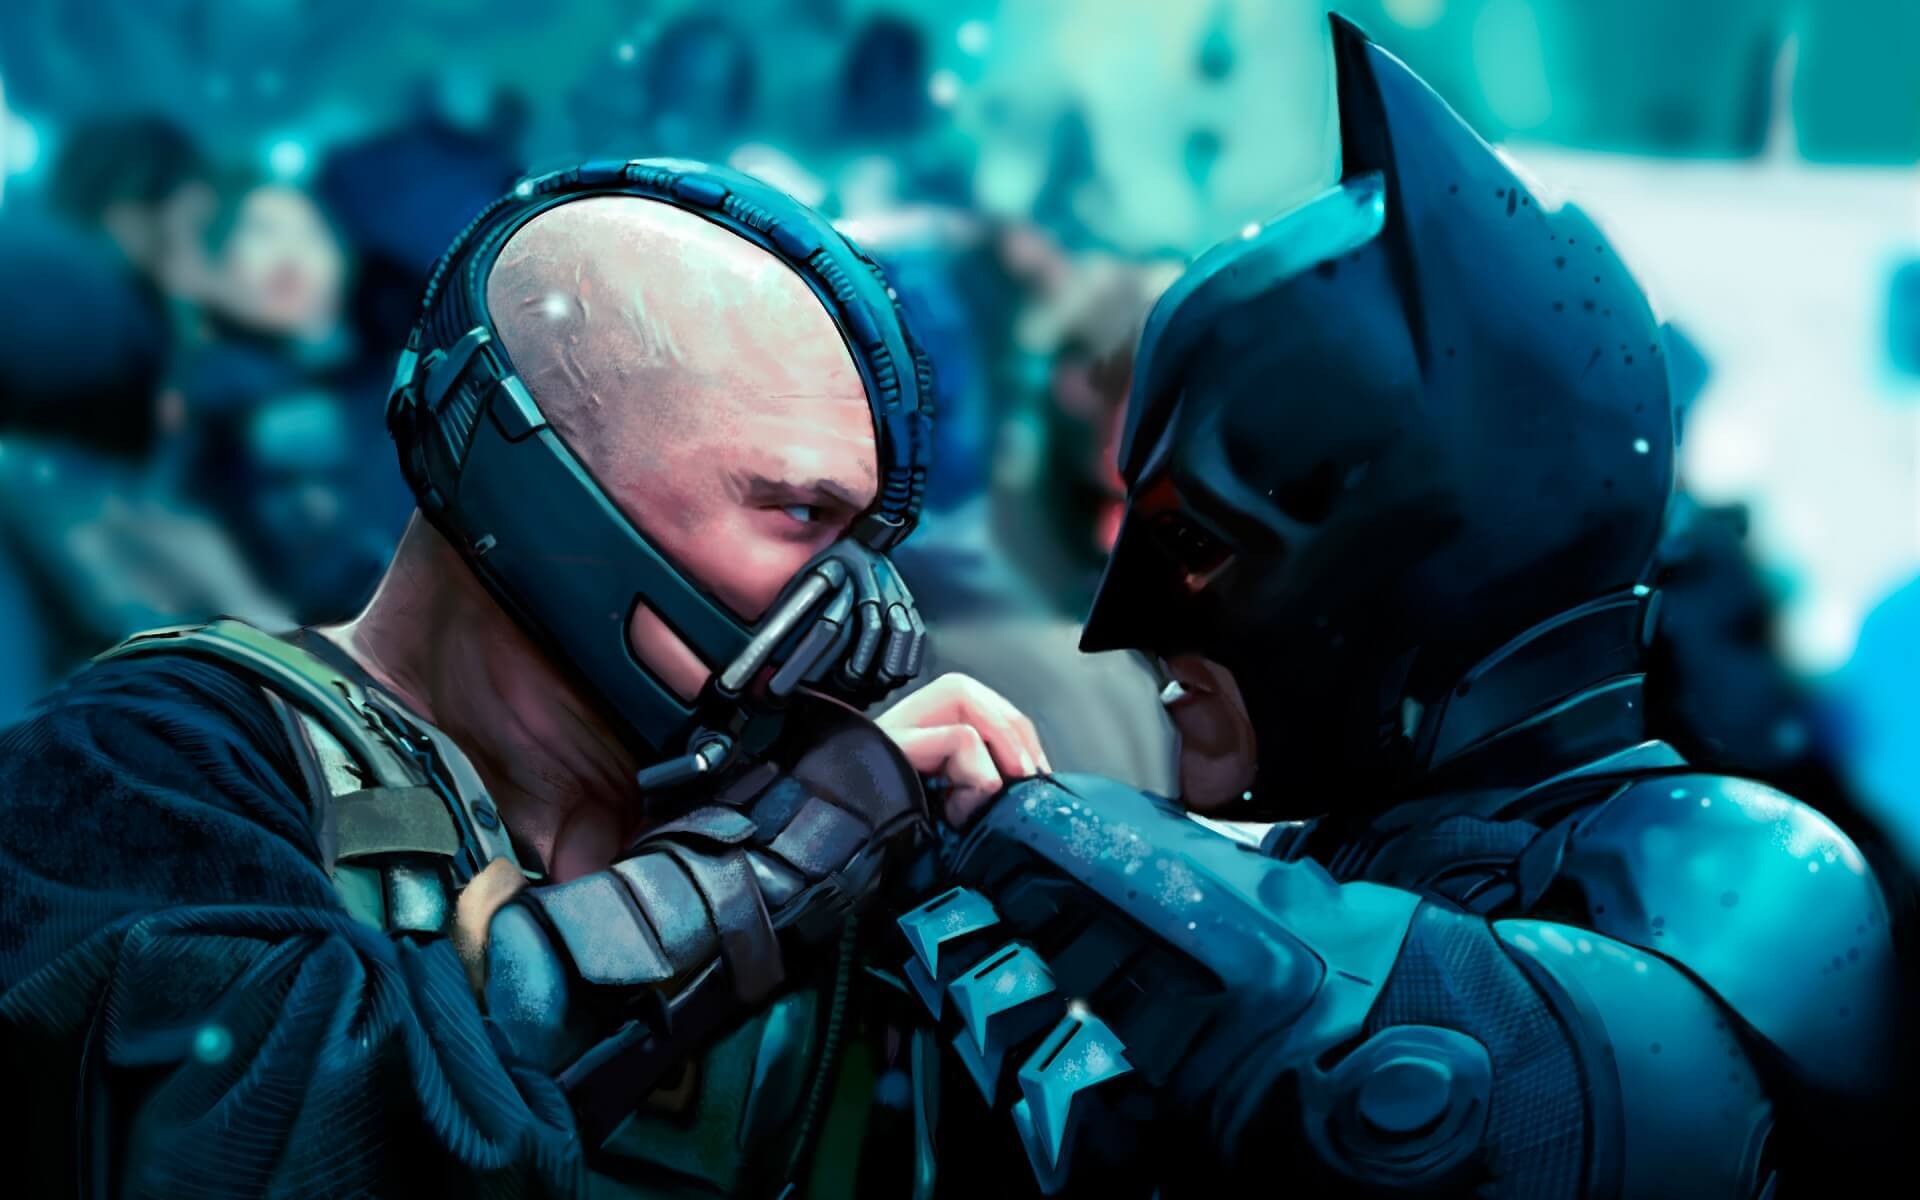 Best Bane Quotes in The Dark Knight Rises, Ranked for Screenwriters